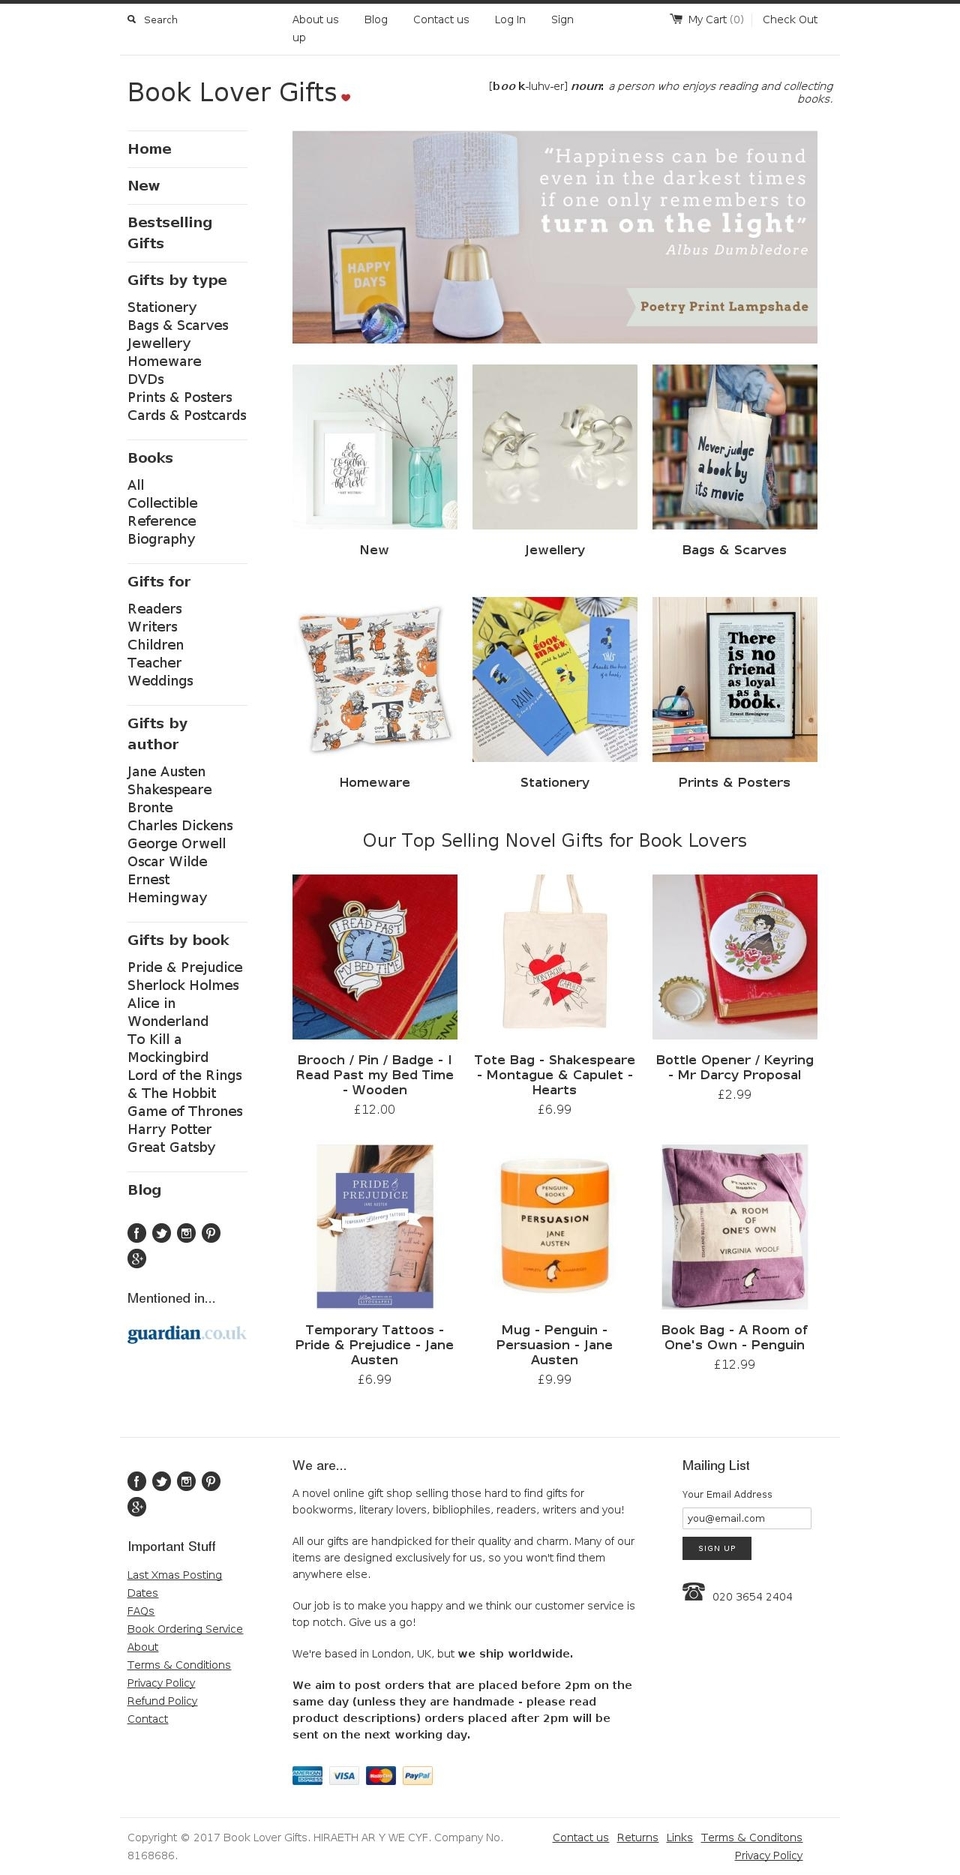 Craft Shopify theme site example booklovergifts.com